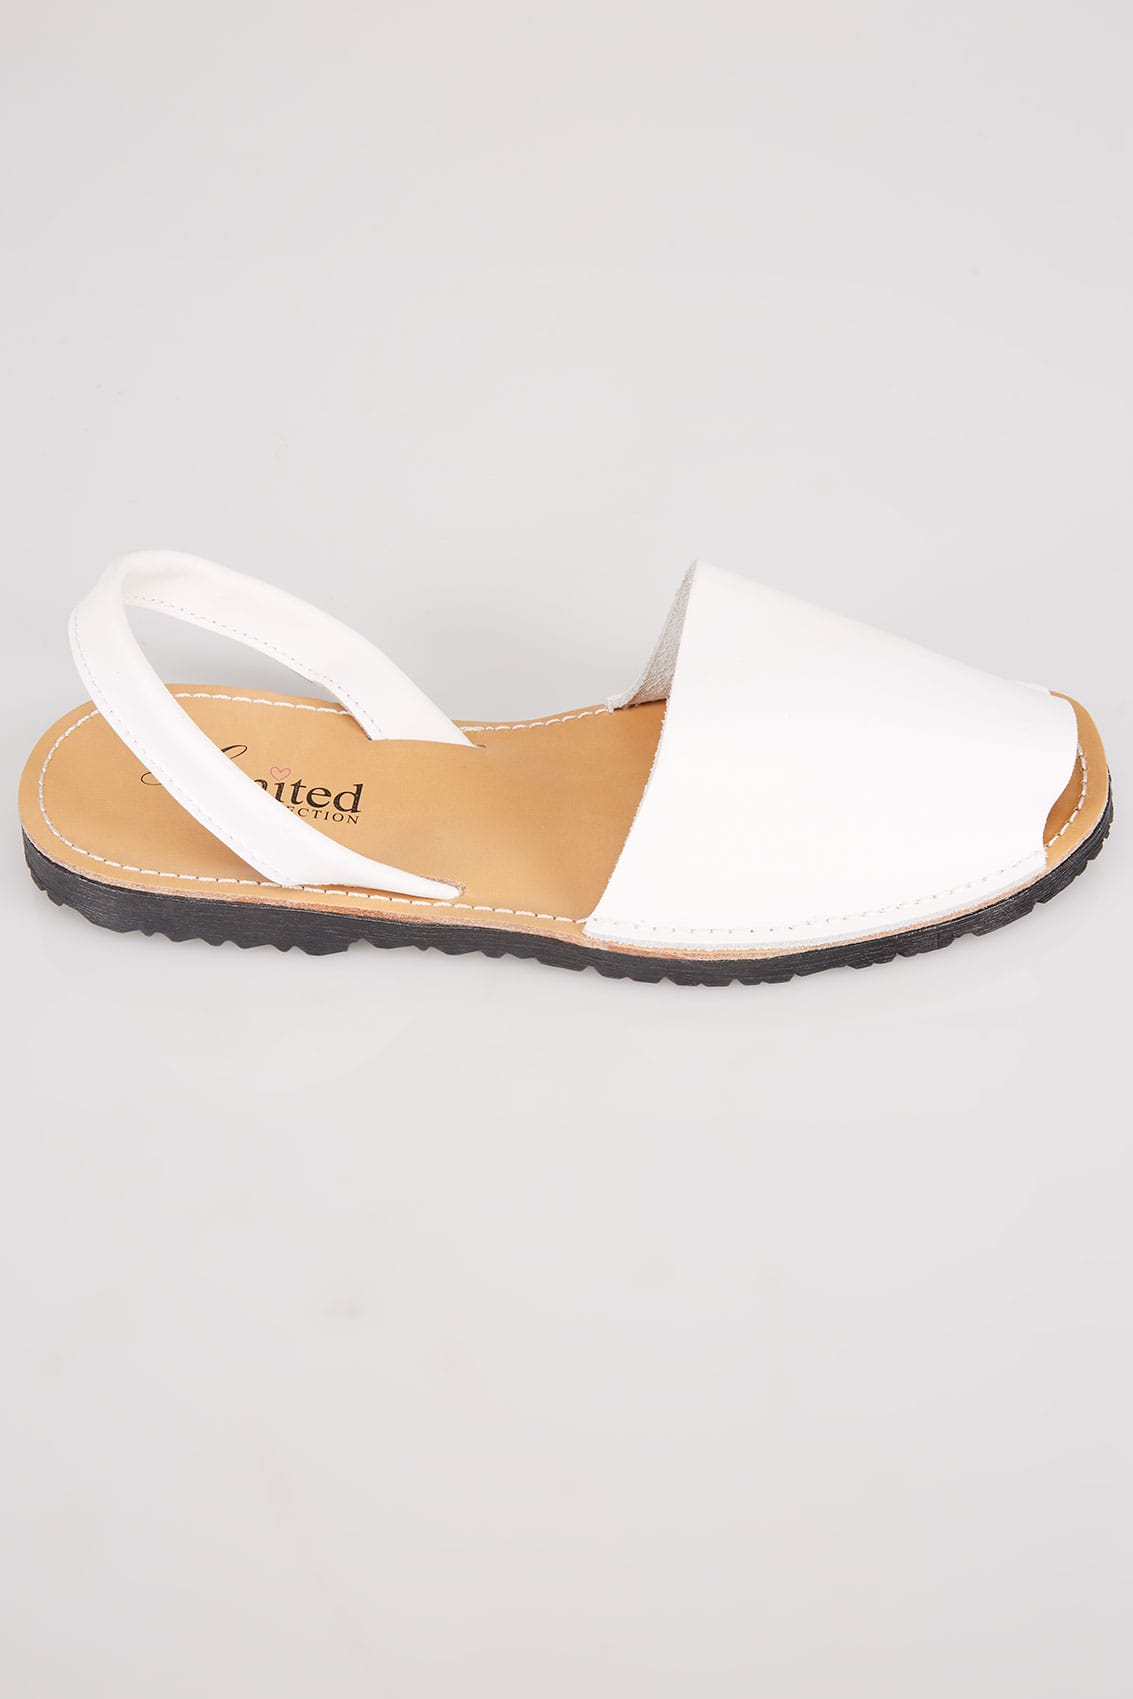 White Real Leather Peep Toe Sandals In E Fit: 4,5,6,7,8,9,10